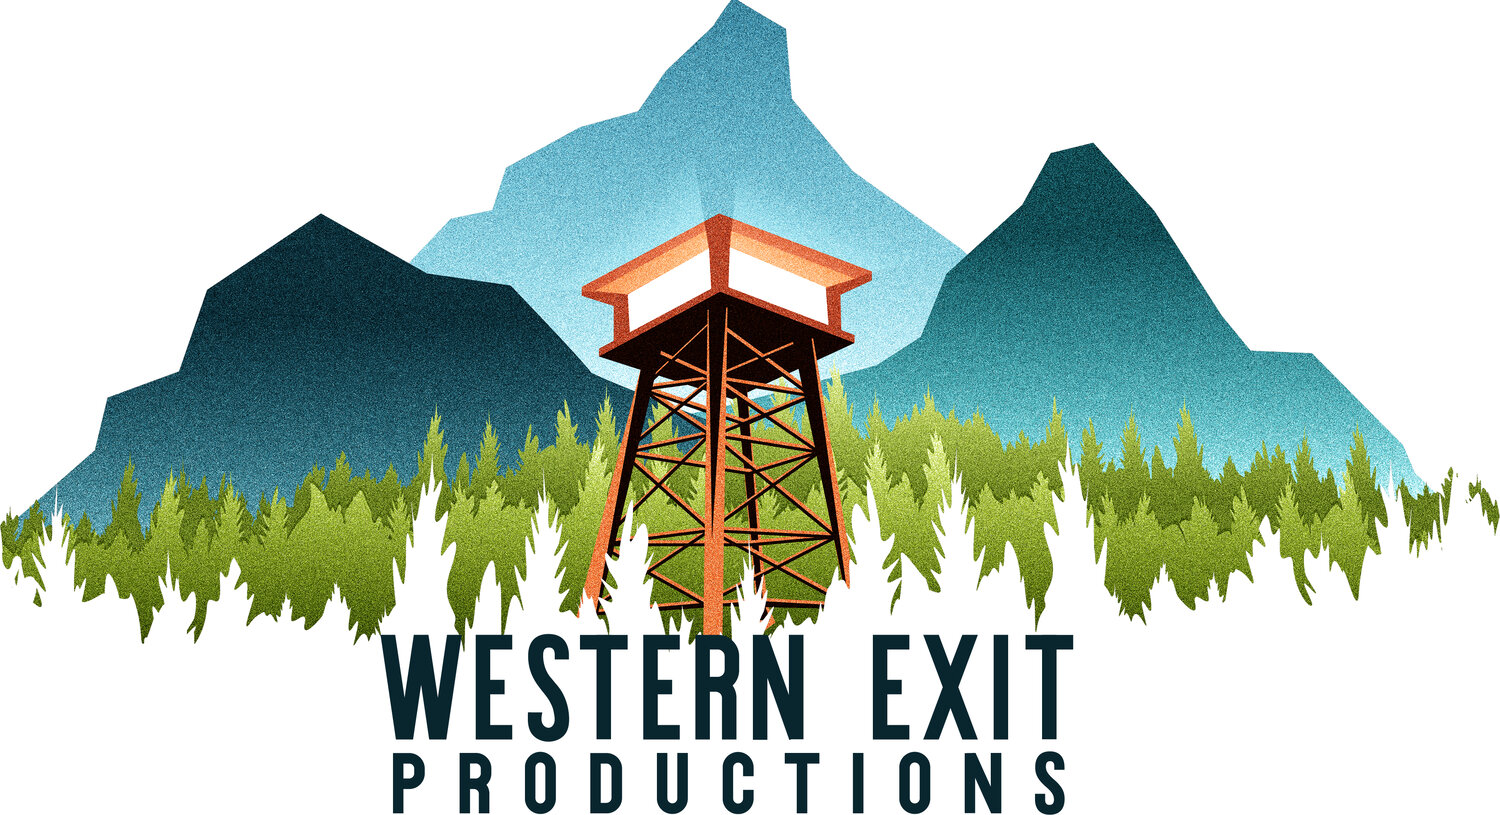 WESTERN EXIT PRODUCTIONS